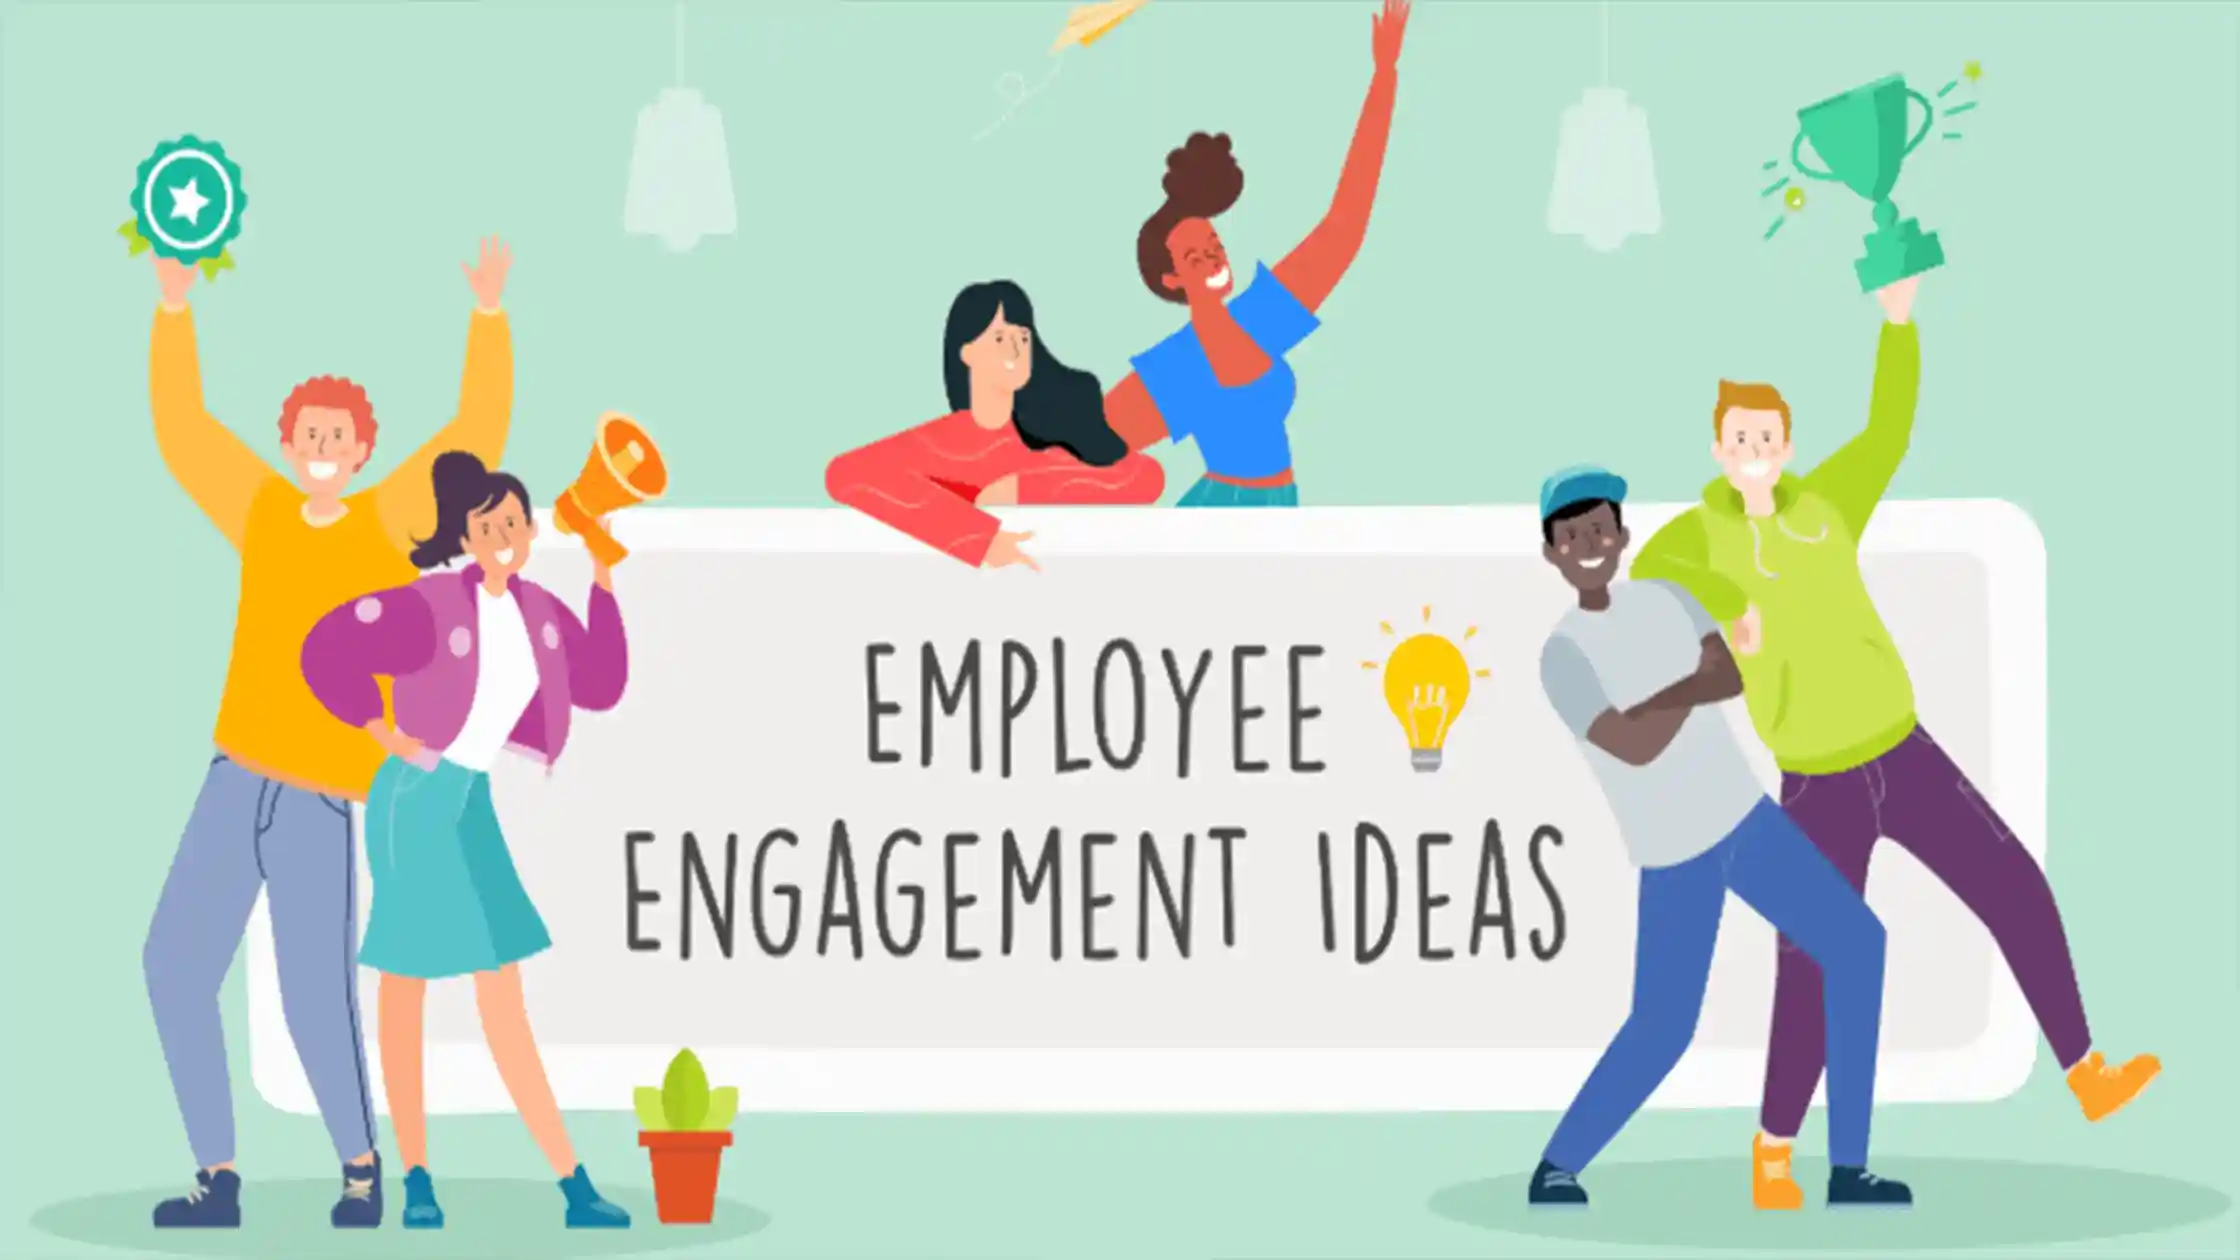 7 Tips to Increase Employee Engagement at the Workplace